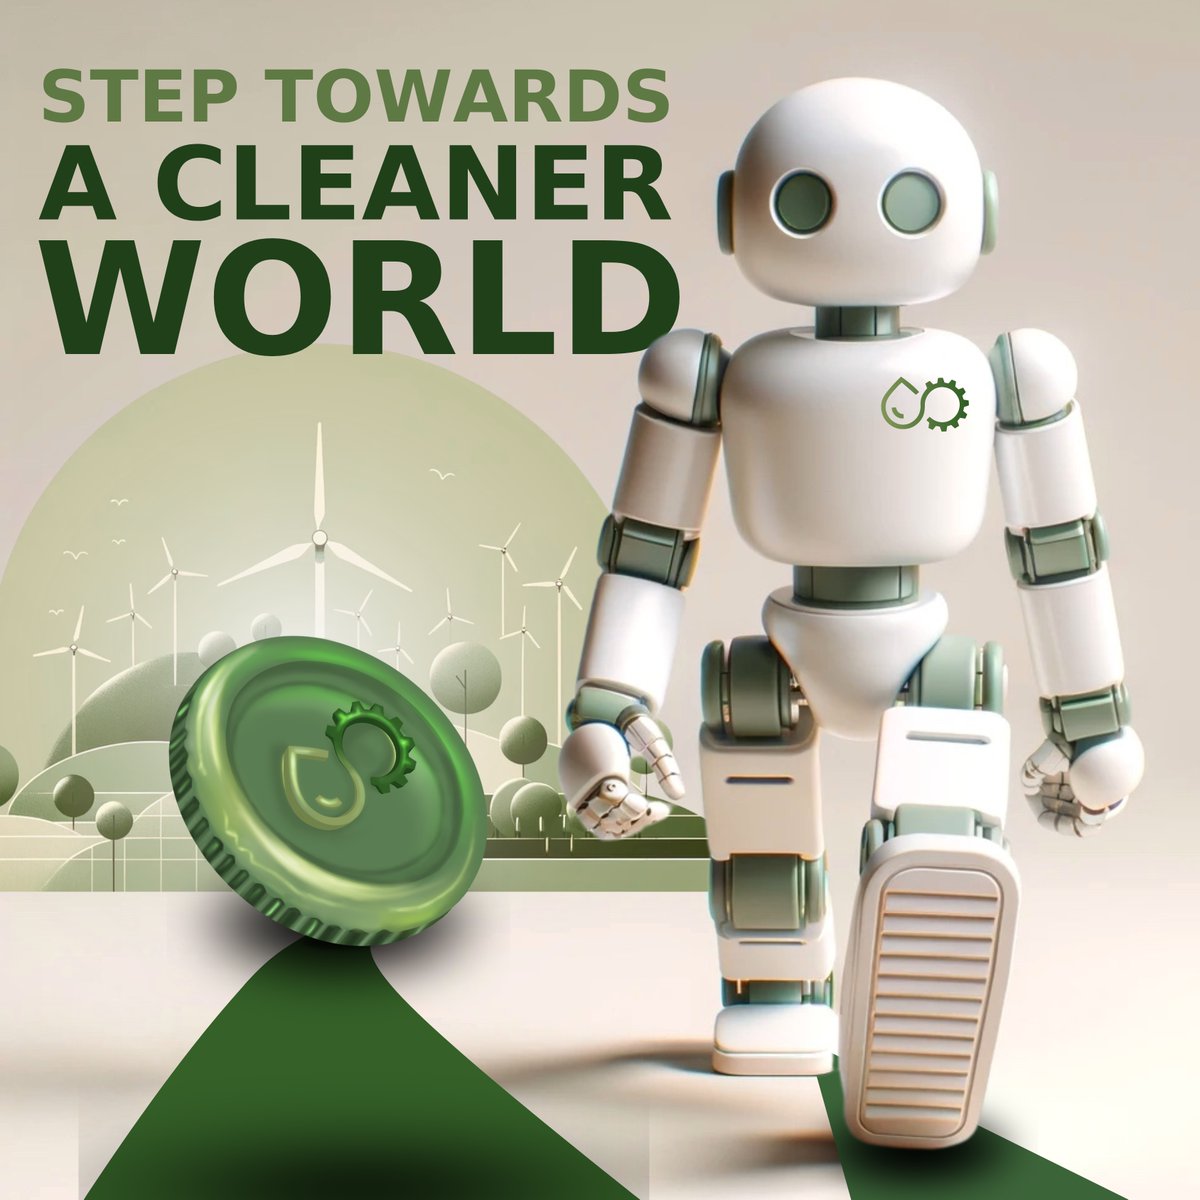 Join the #GreenHydroMotion revolution 🌿🌍. Your investment fuels the transition to #GreenHydrogen. With 1000 Coins, secure a 20% hydrogen voucher. Let's build a clean energy legacy together. Invest at greenhydromotion.com | greenhydromotioncoin.com #CleanTech #EcoFuture